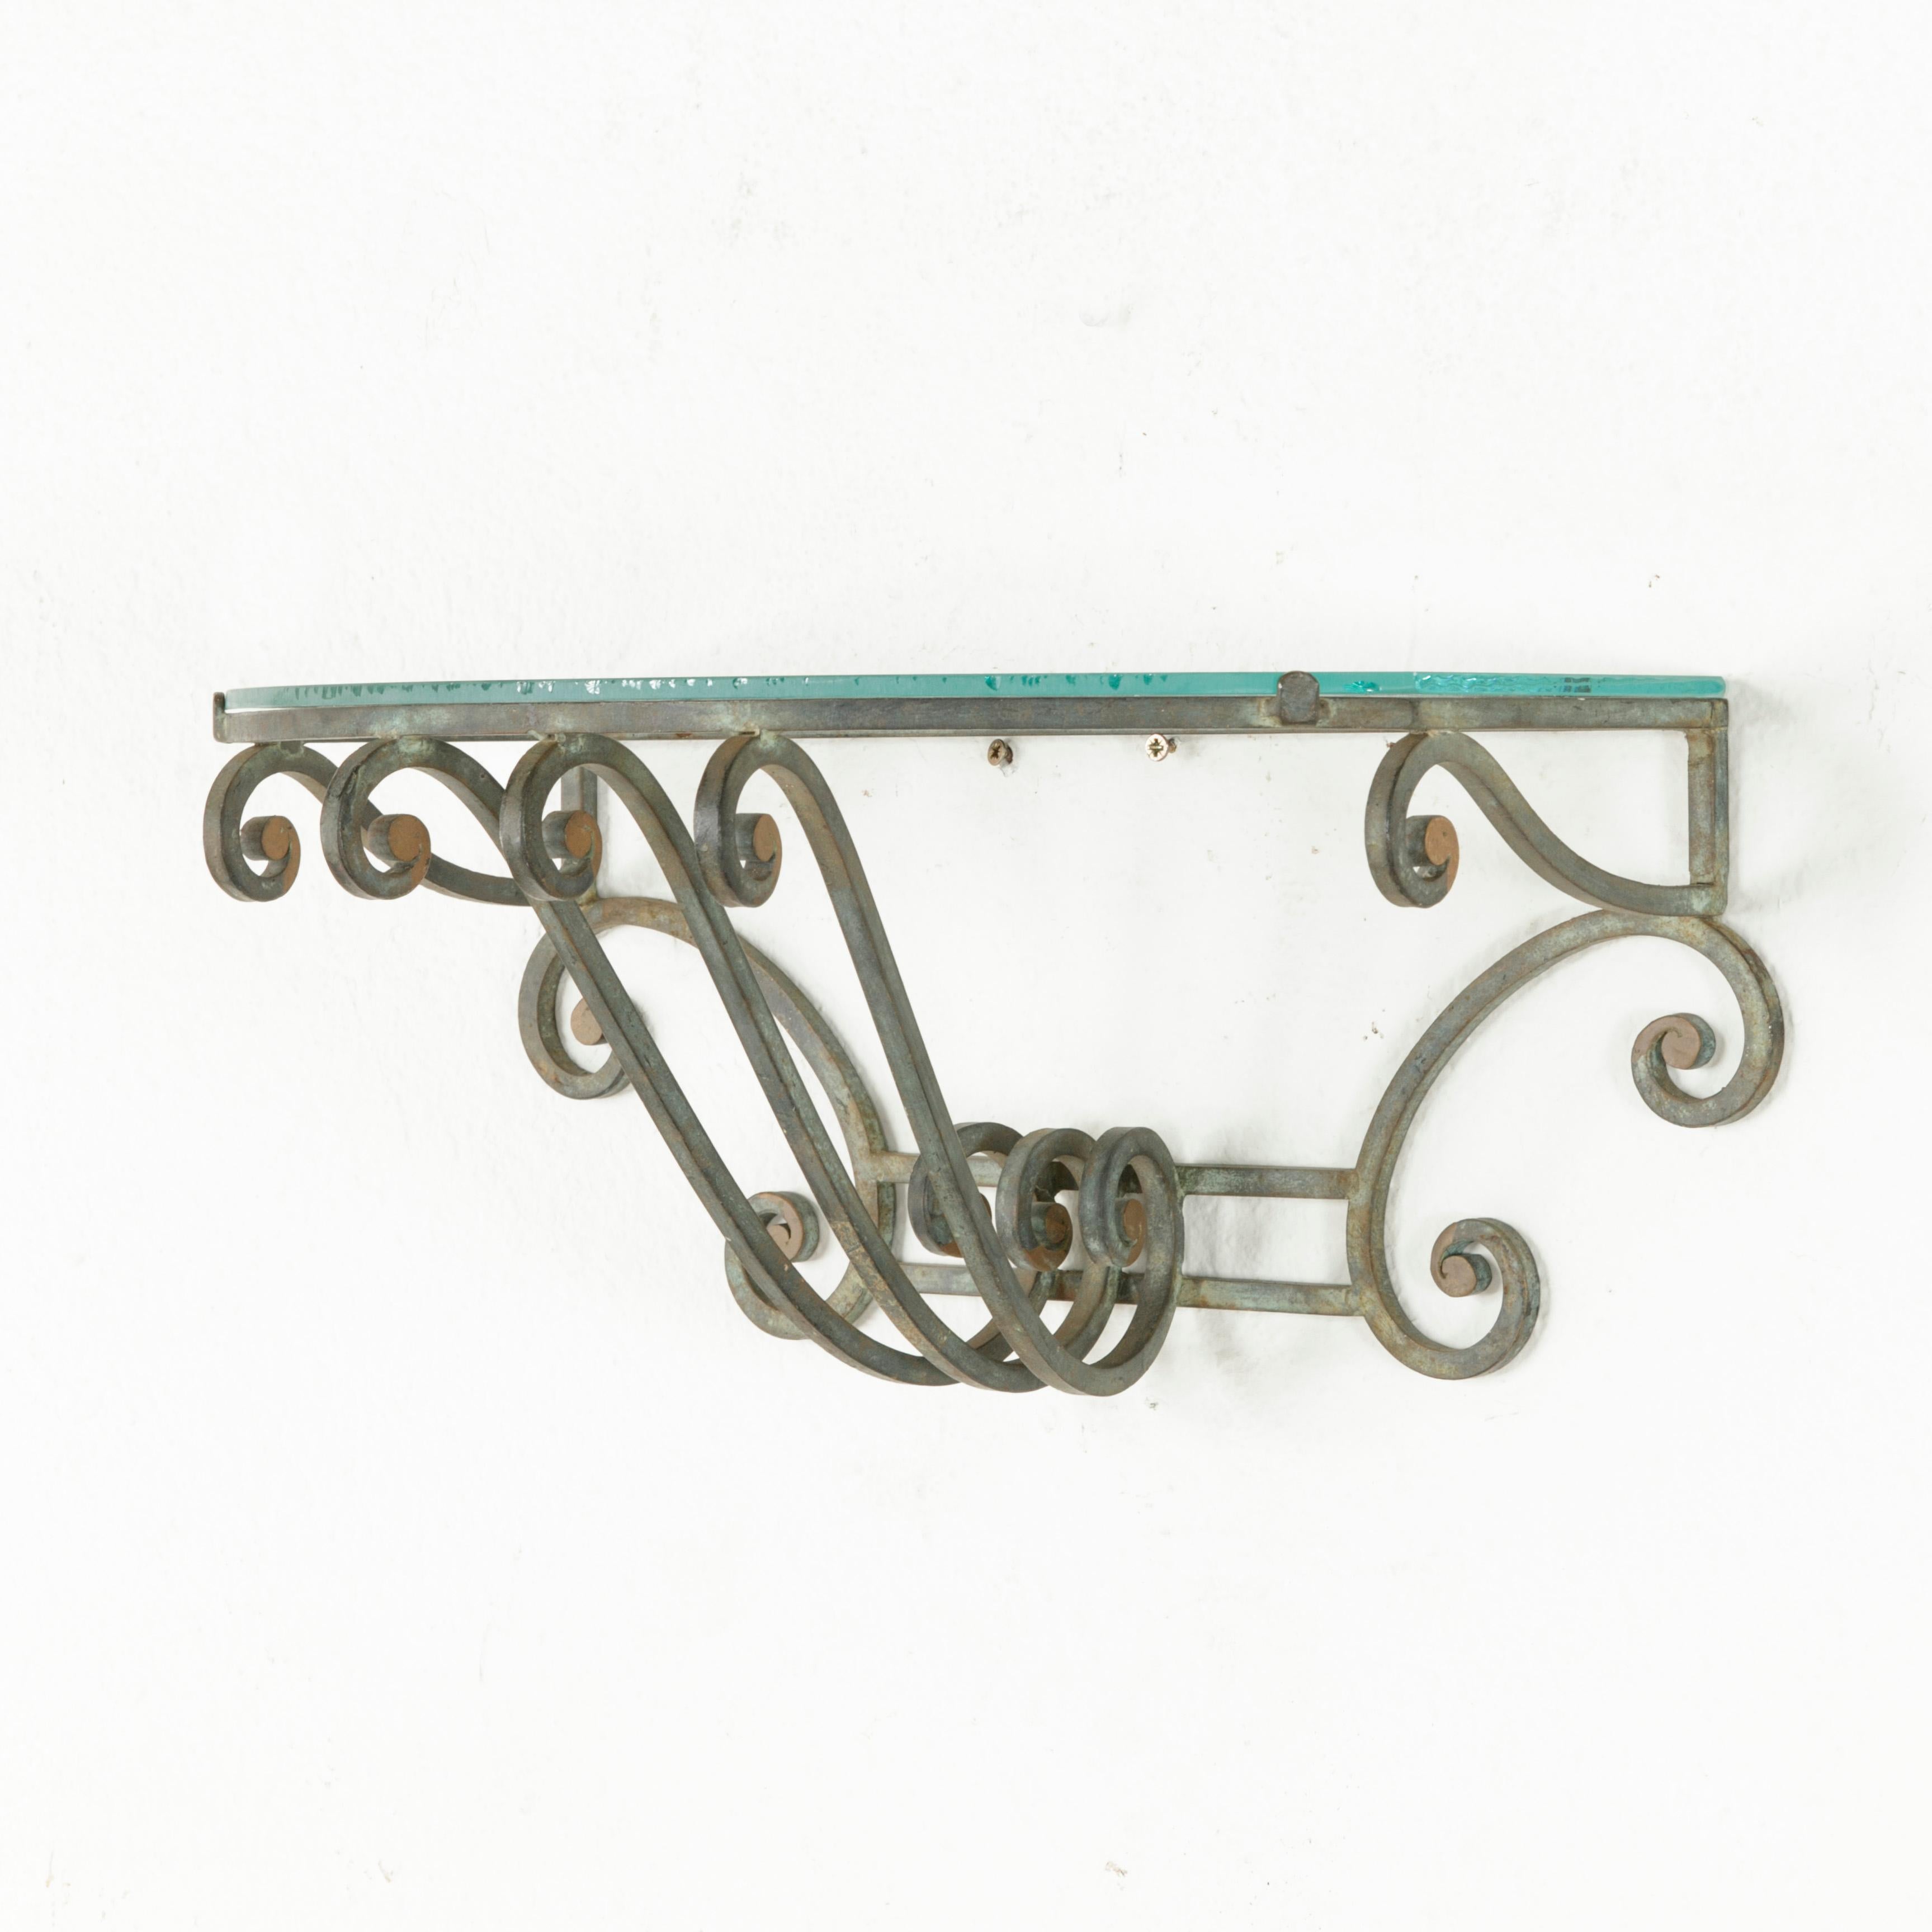 This pair of midcentury French iron wall sconces features handwrought scrolling ironwork and a verdigris patina with painted gold accents. A glass shelf rests on the demilune platform top of each bracket, providing display space. The glass may be